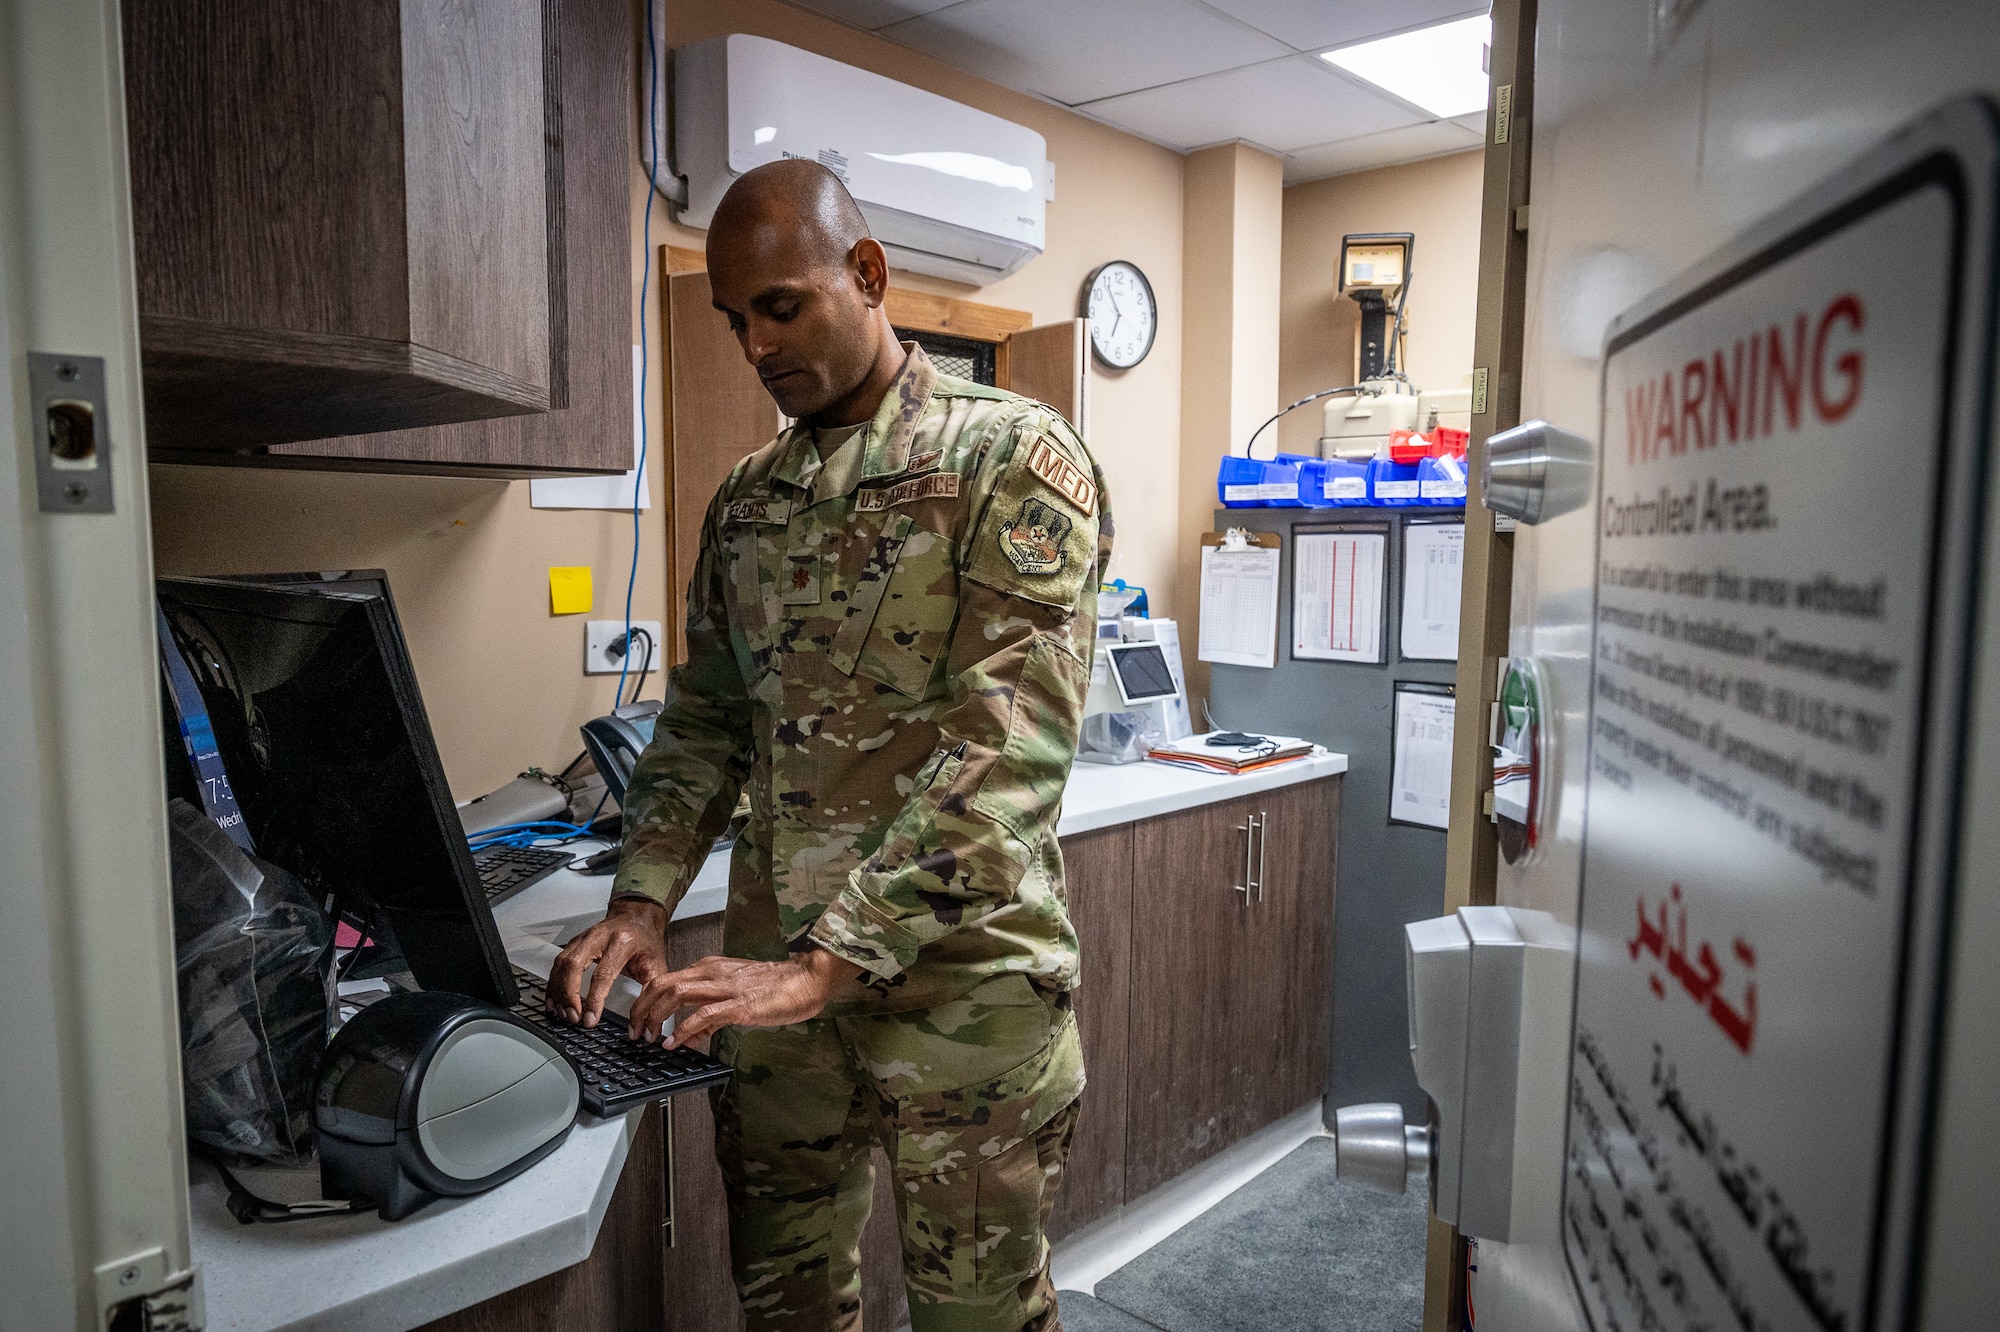 U.S. Air Force Maj. Sunil Francis, 332d Expeditionary Medical Group chief nurse, logs onto a computer located in the clinic pharmacy to check for prescriptions in the queue to be filled at an undisclosed location in Southwest Asia, April 6, 2022. Francis is a multi-capable Airman because he supports the pharmacist, Capt. Asia Sanders, 332d EMDG chief of ancillary services, as the on-call pharmacist. (U.S. Air Force photo by Master Sgt. Christopher Parr)